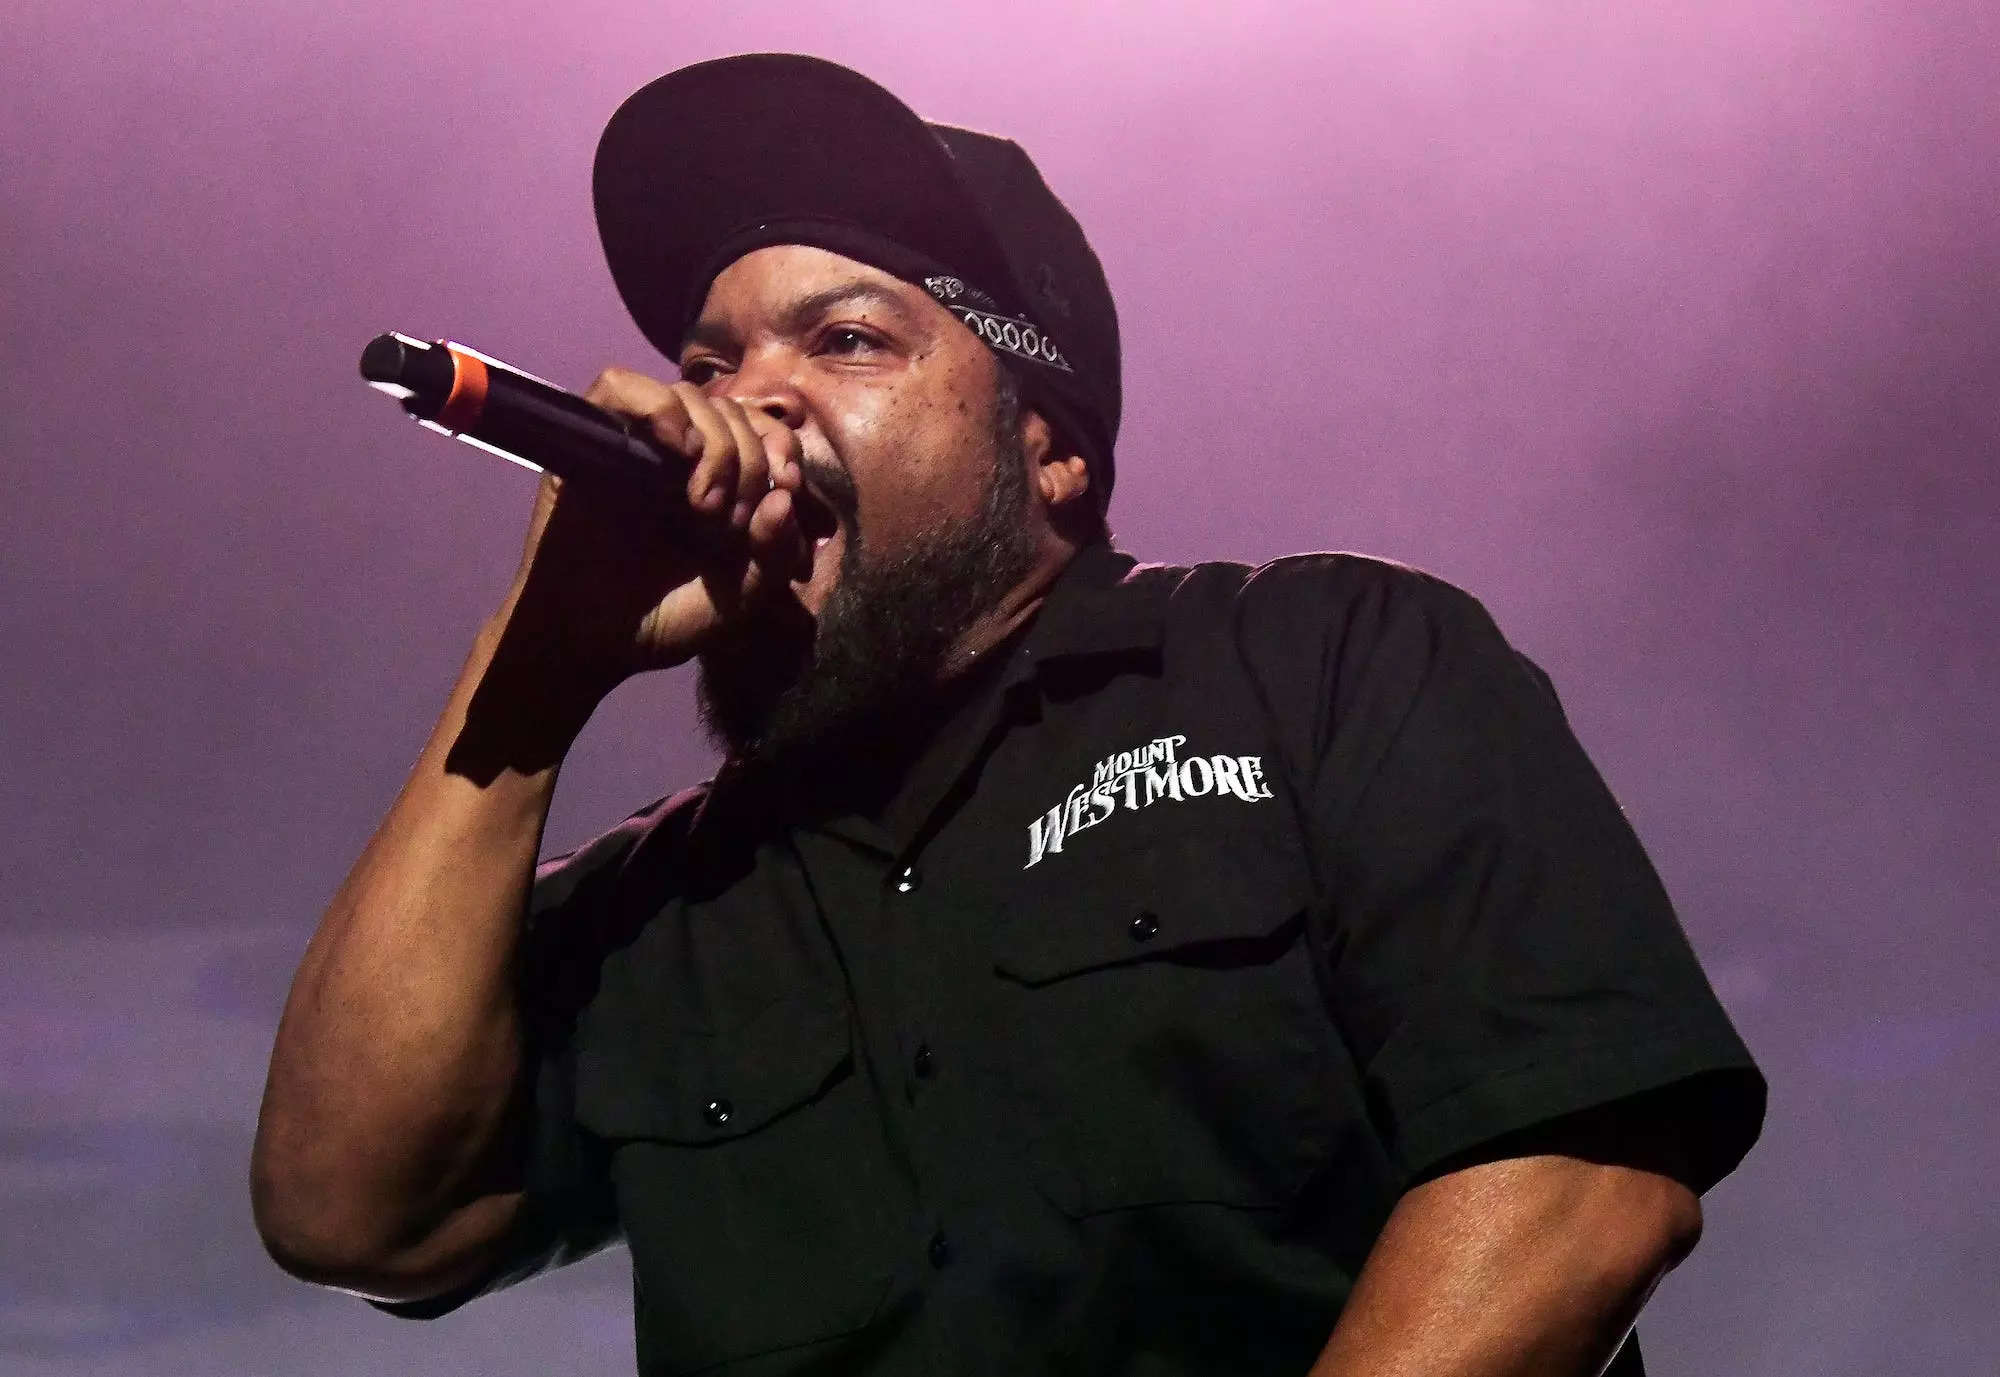 Ice Cube performs during the V101.1 Holiday Jam at Golden 1 Center on December 10, 2022 in Sacramento, California.